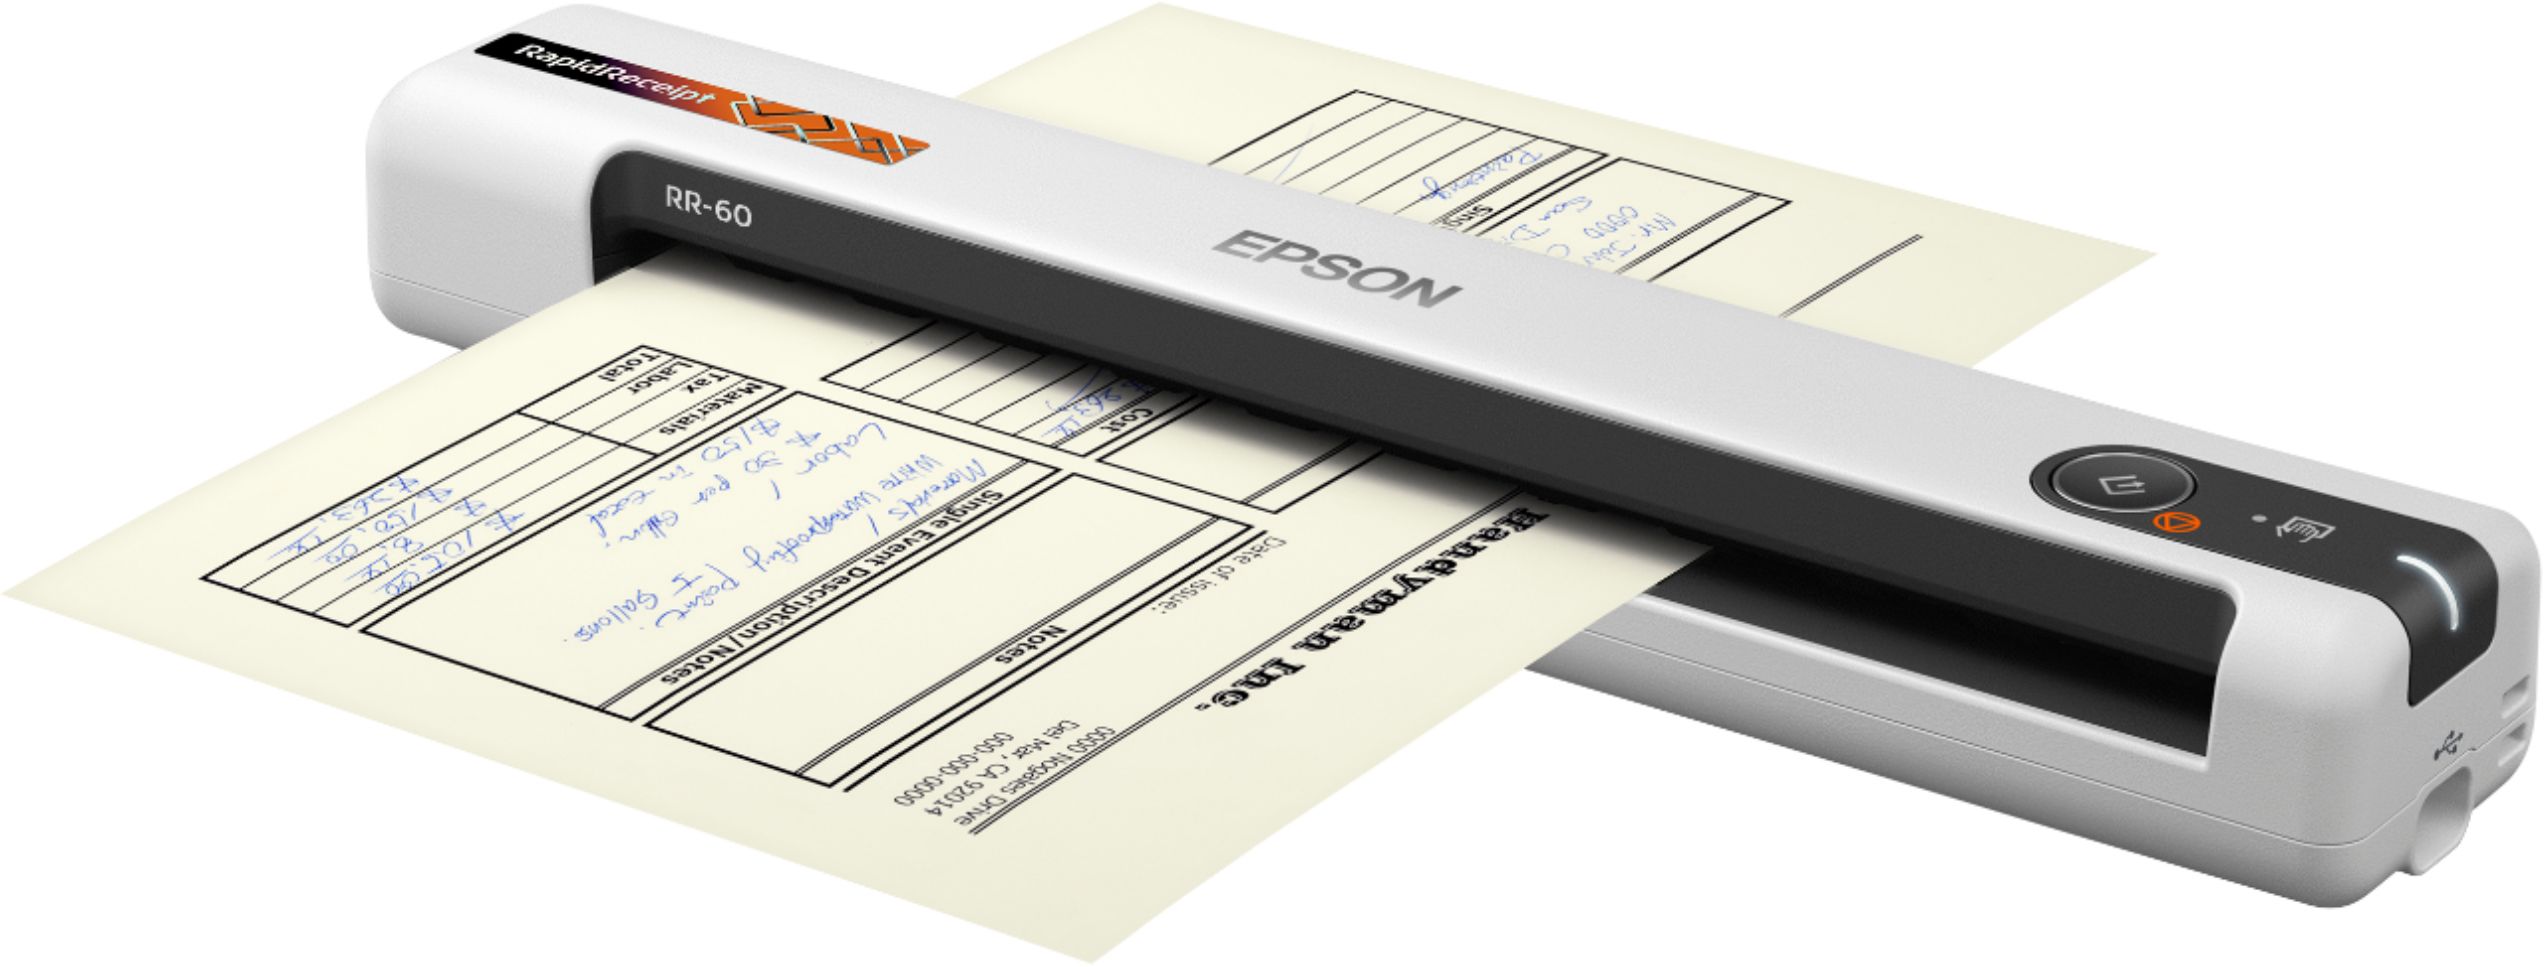 Compatible Receipt and Document Scanners